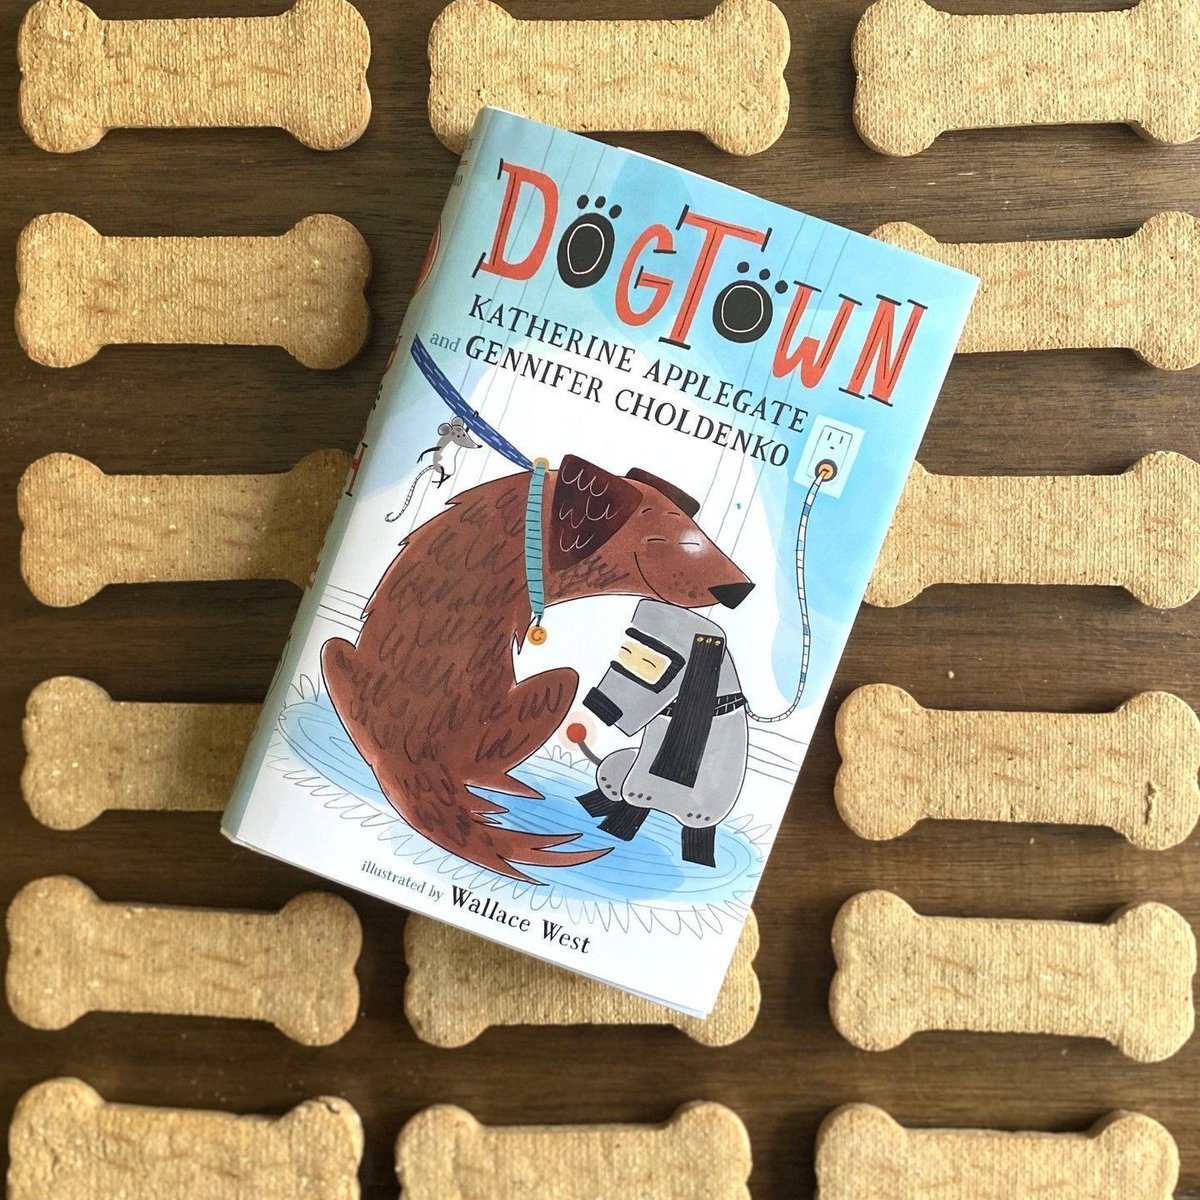 'I know what you're thinking: That poor dog only has three legs. But don't go there. It's not that bad, okay? So, I'm not American Kennel Club material. Big deal.' 🐶💙🐭 #Dogtown @MacKidsBooks